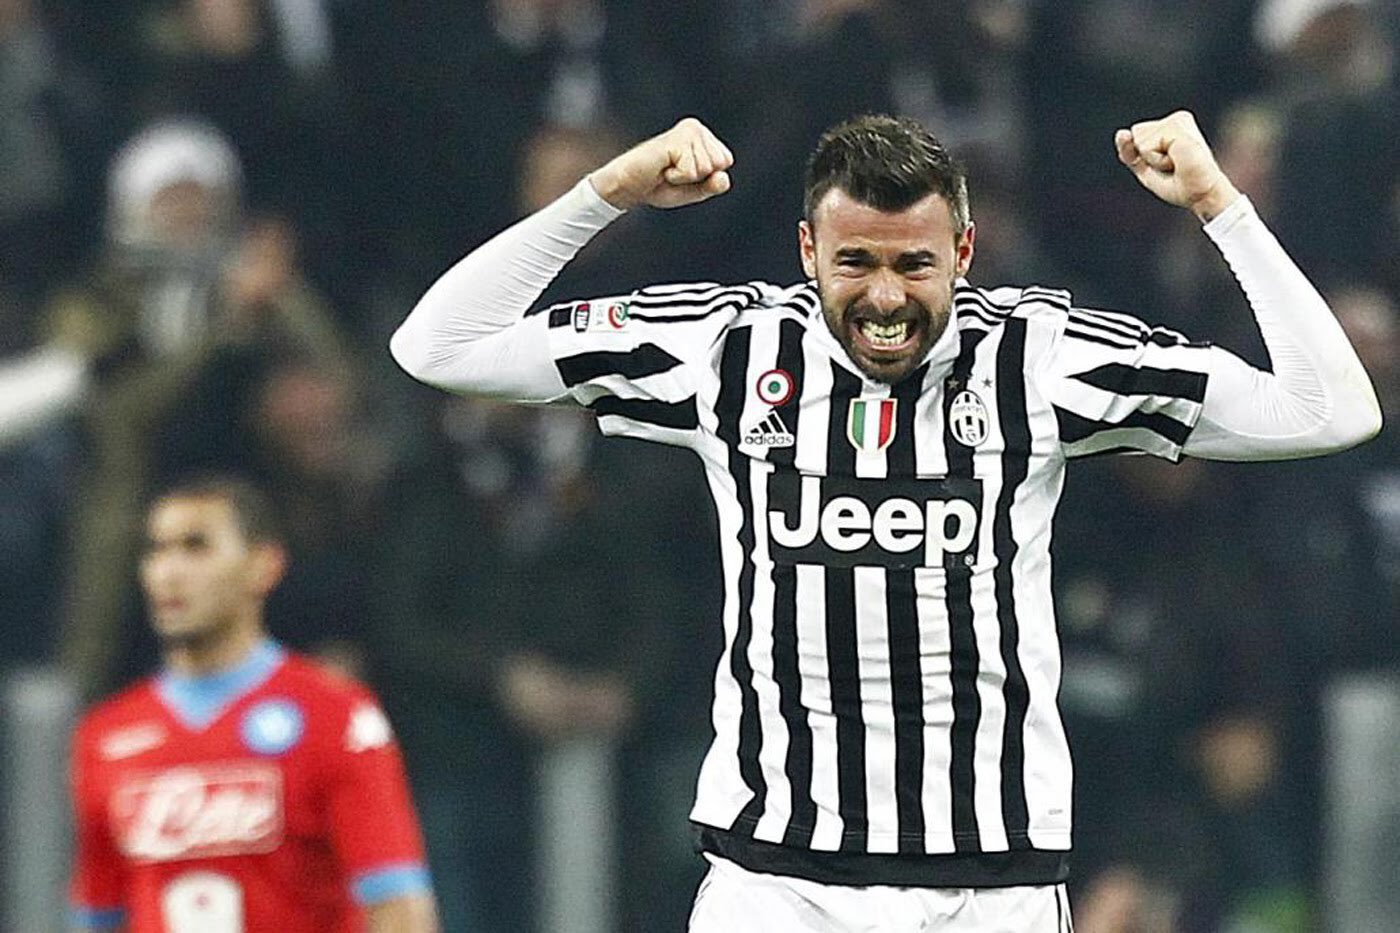 Happy birthday to Juventus legend Andrea Barzagli, who turns 37 today. 

Games: 268
Goals: 2 : 12 